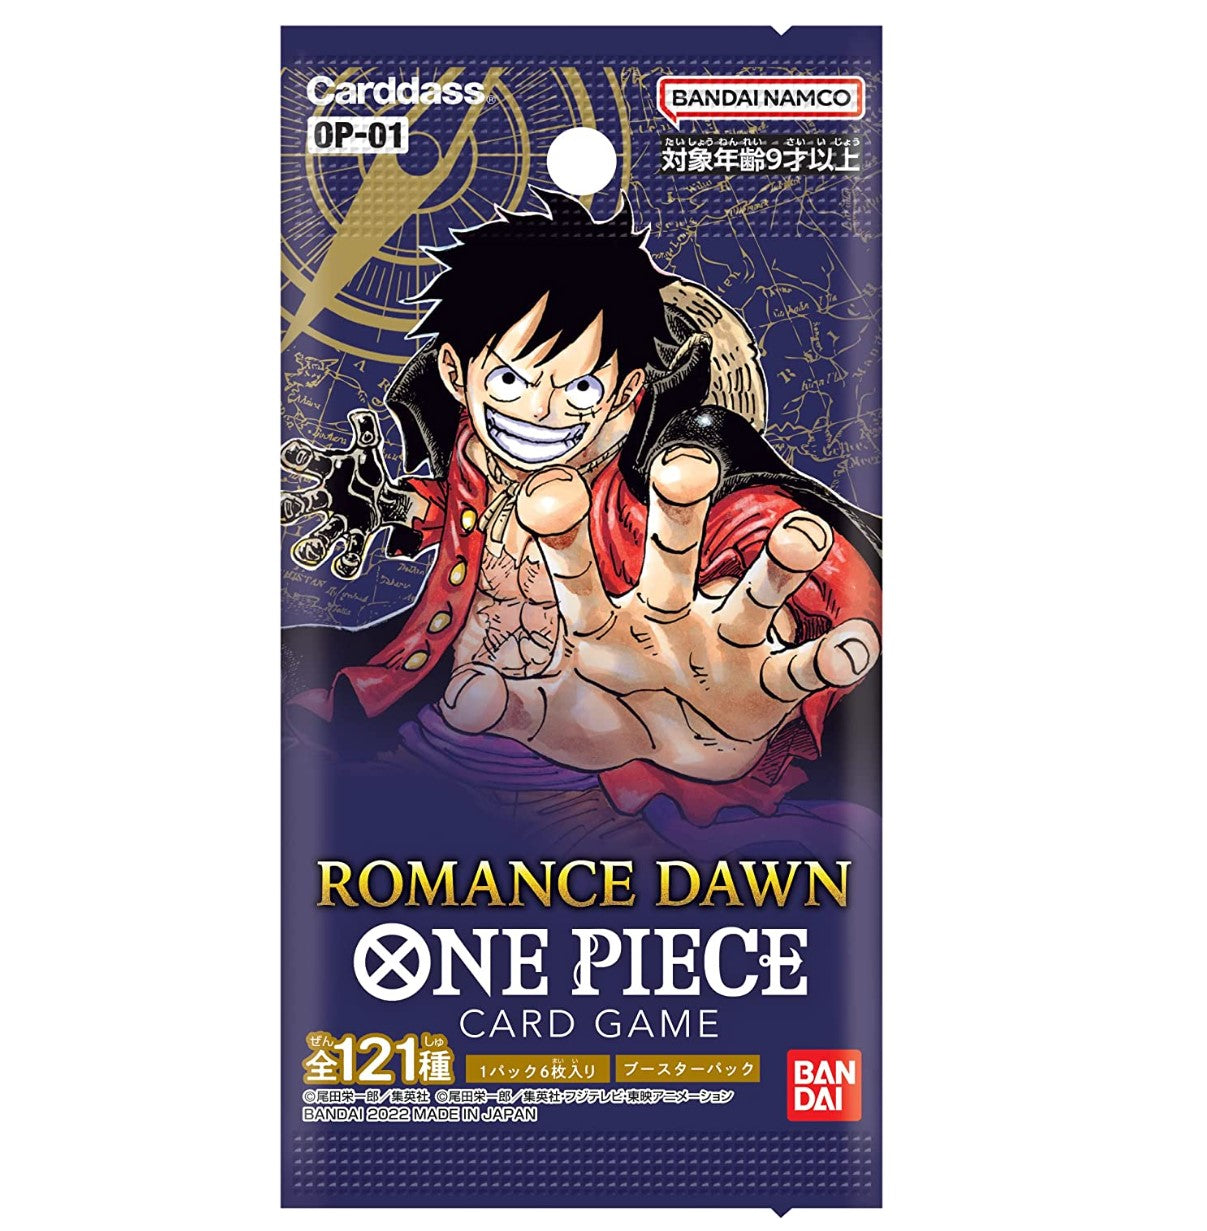 Roronoa Zoro L Parallel [OP01-001] (Premium Card Collection 25th